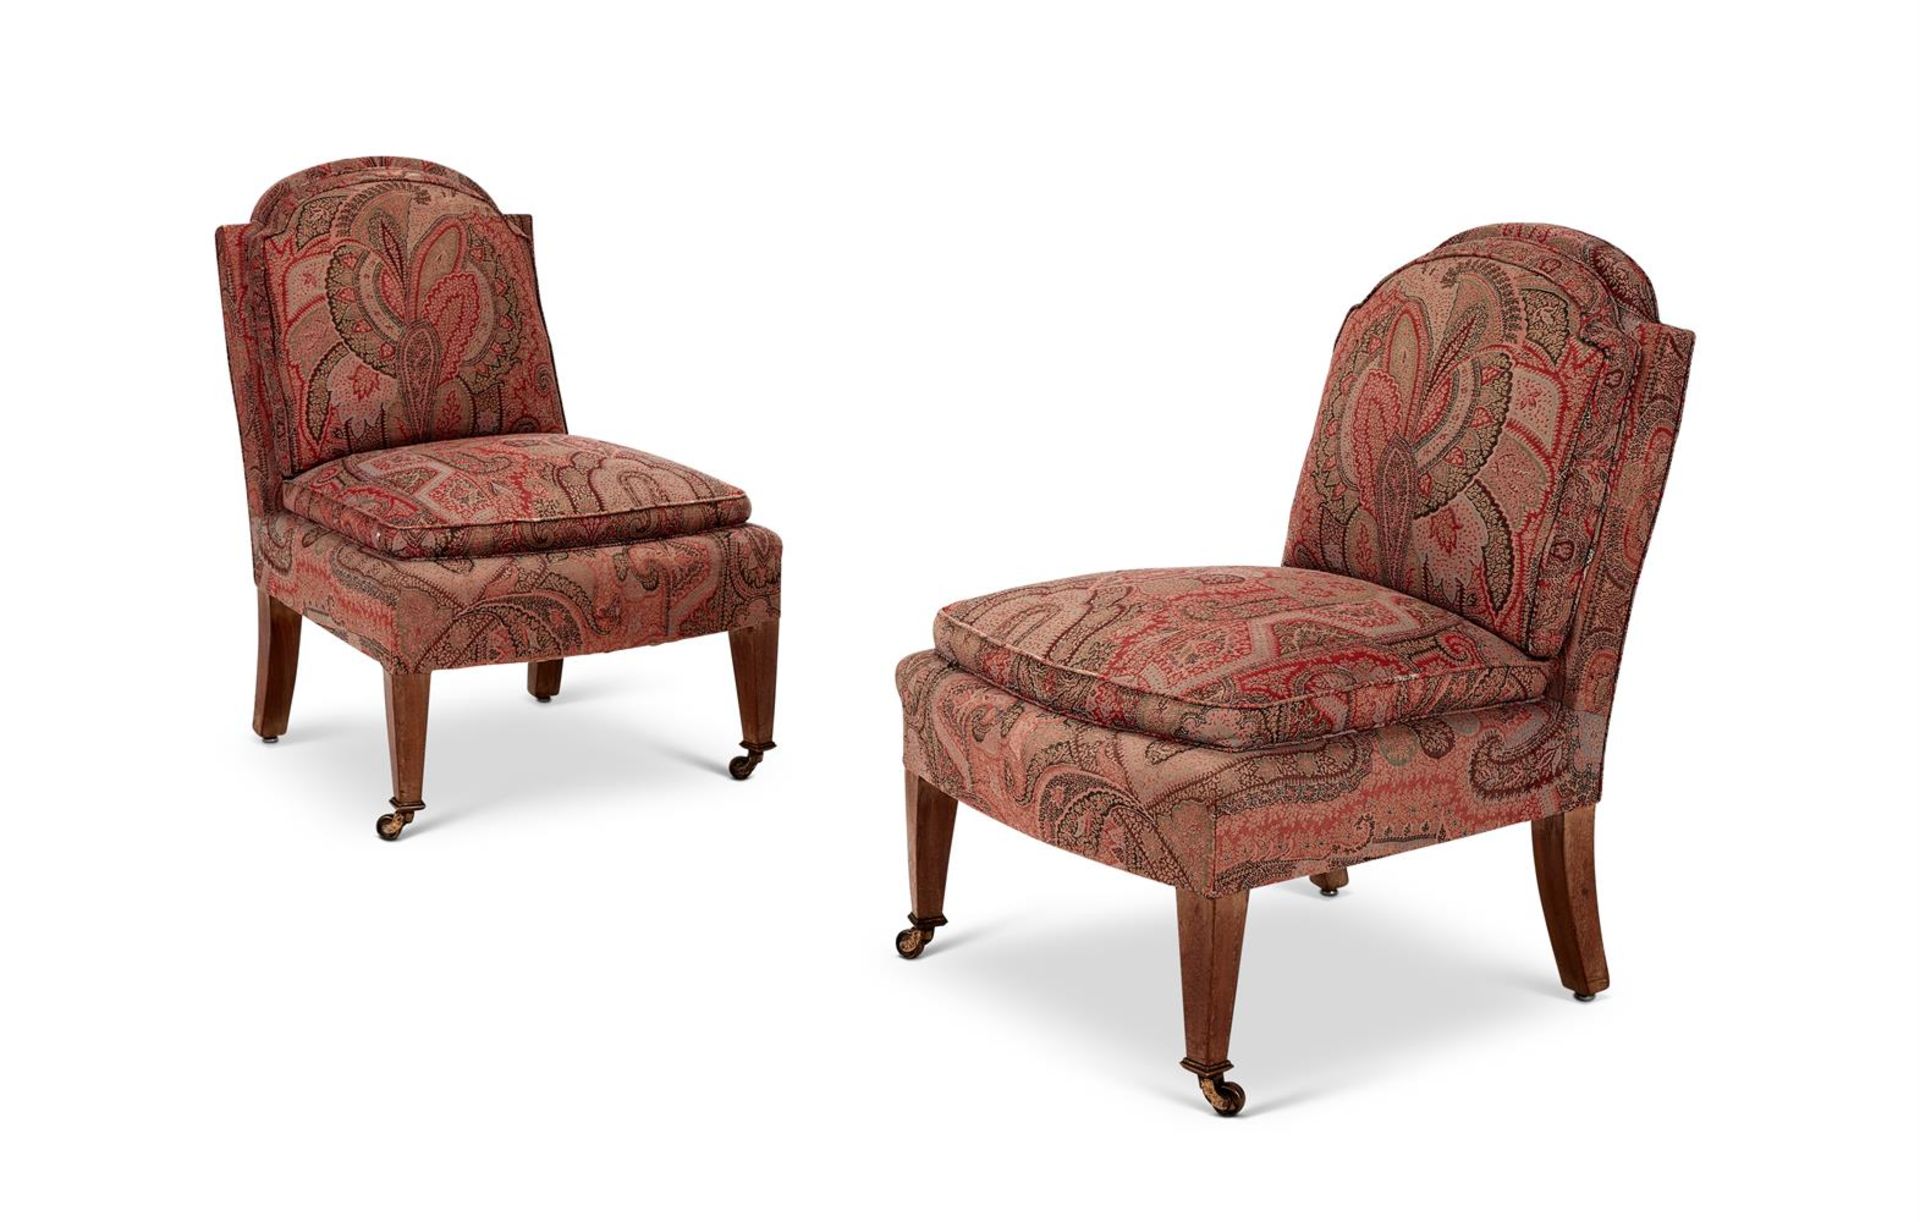 A PAIR OF BANQUETTE SIDE CHAIRS, LATE 19TH CENTURY